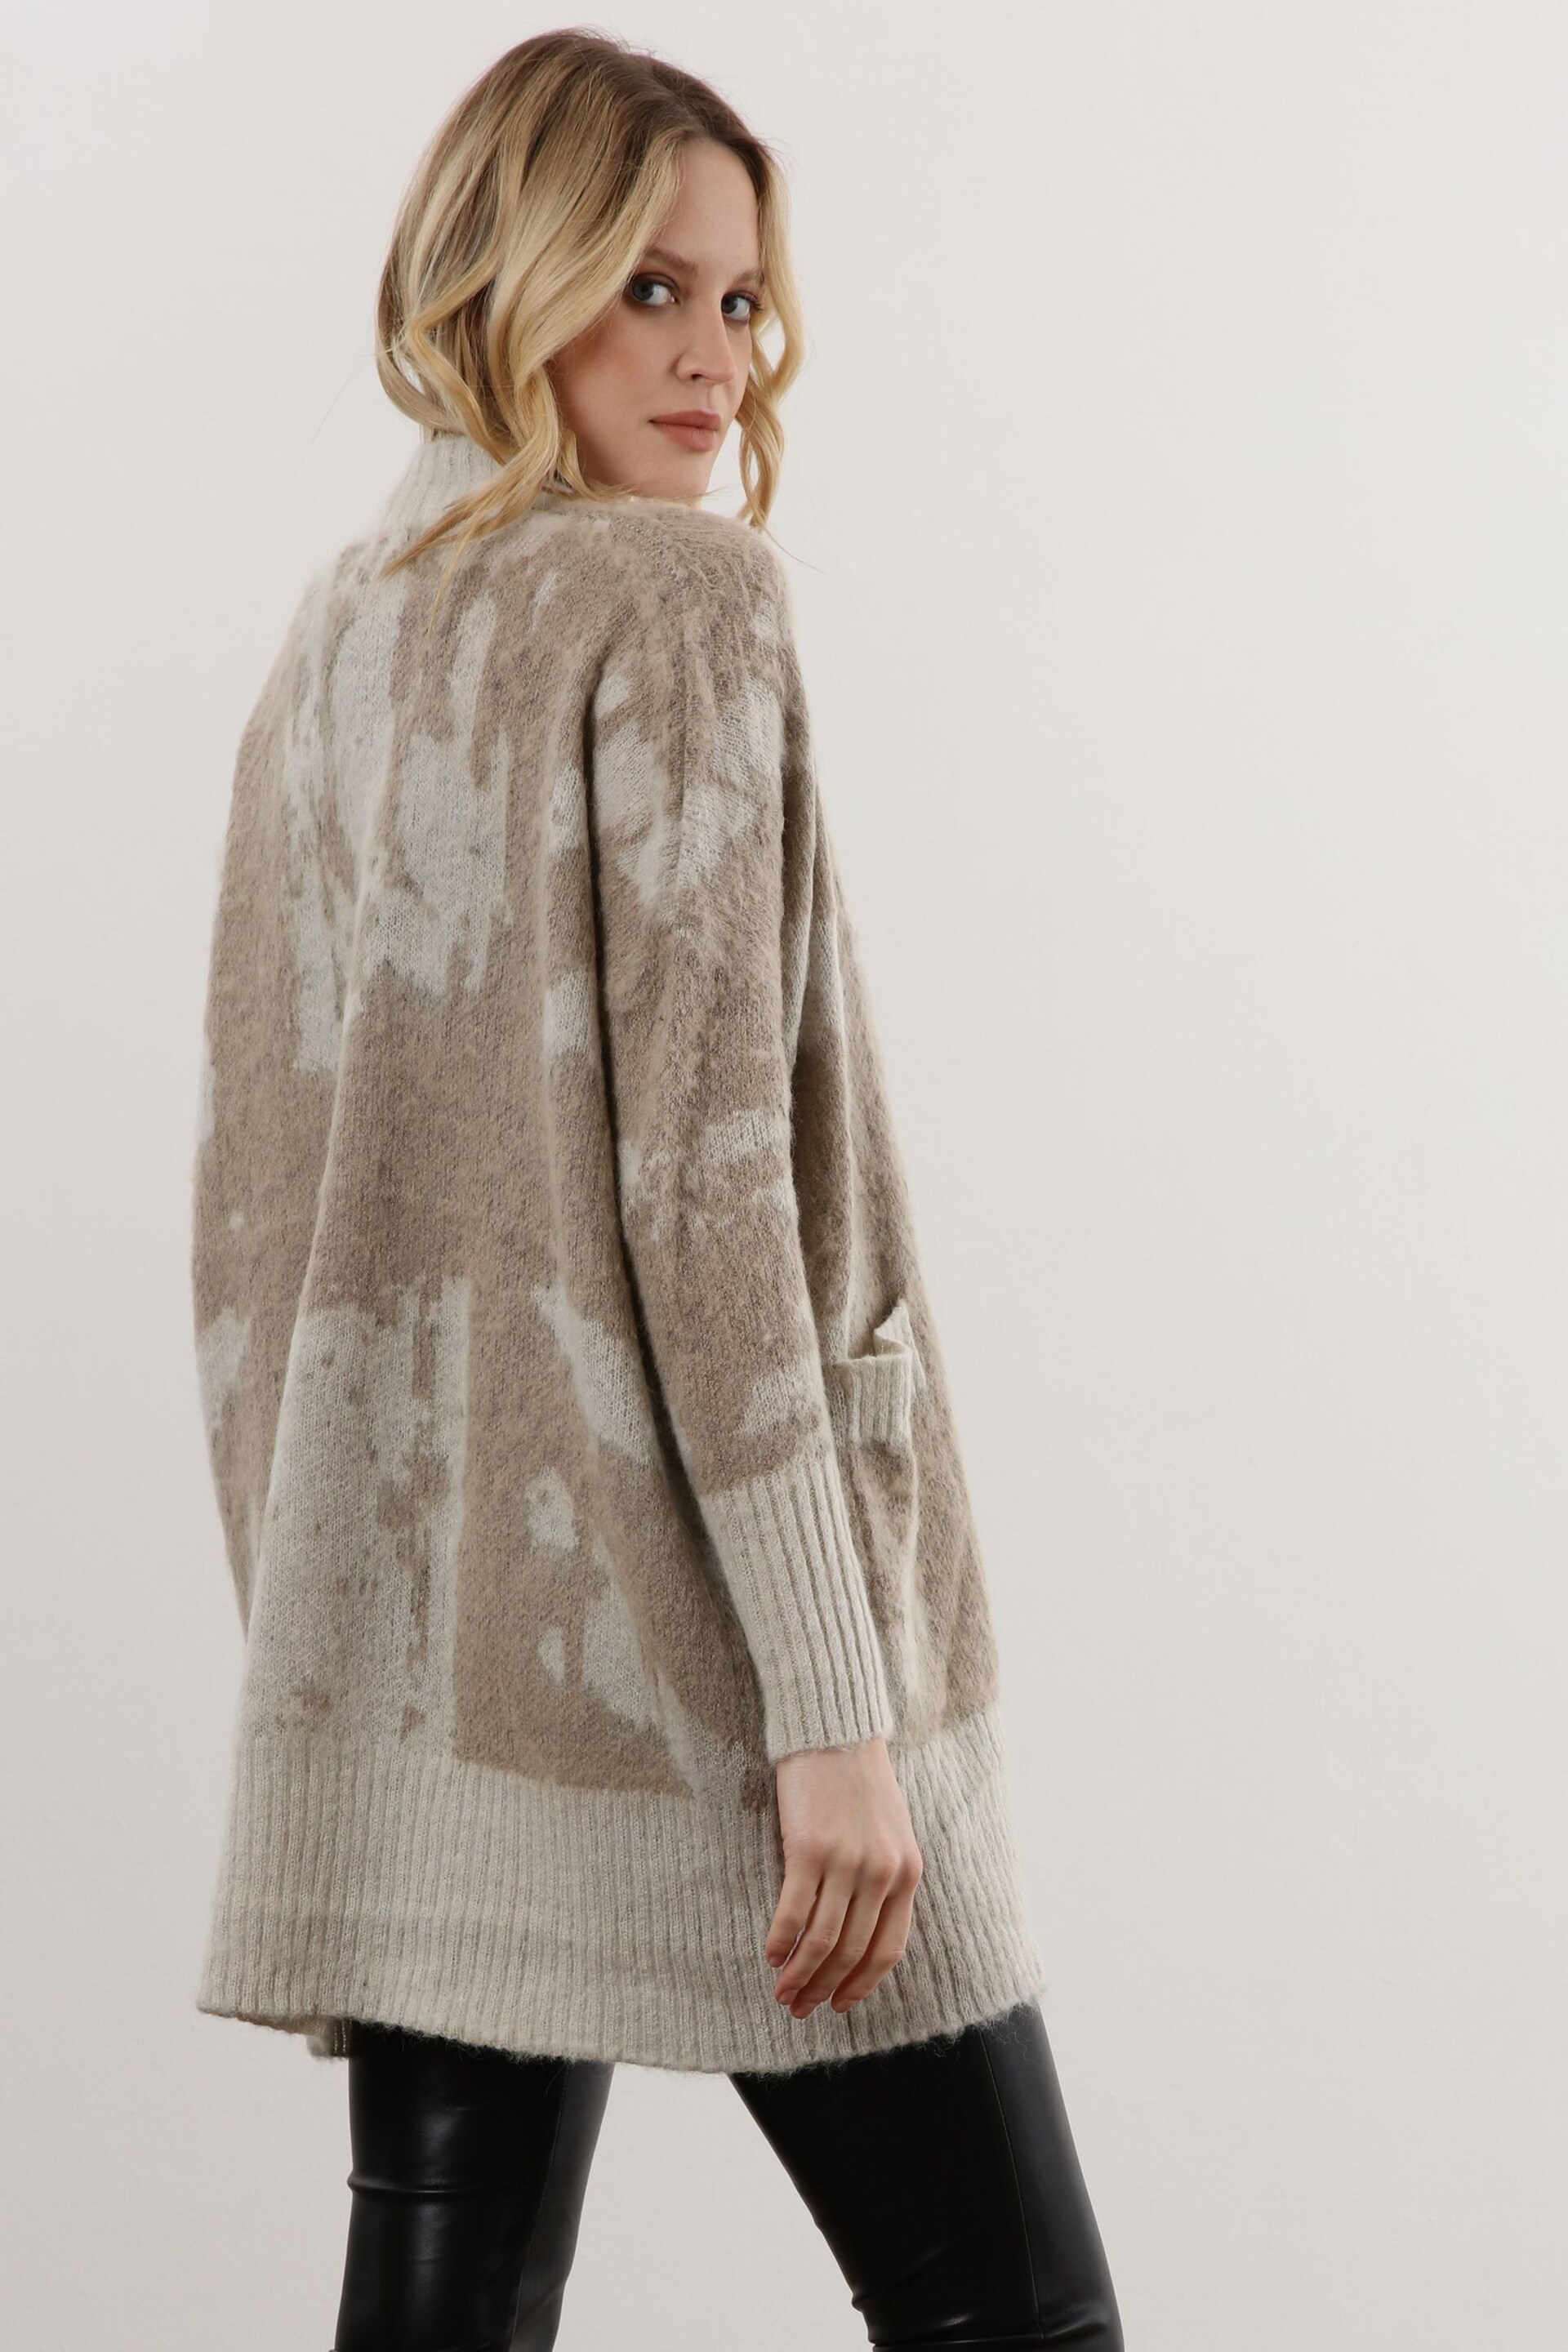 Religion Natural Light Weight Textured Shawl Cardigan In Neutrals - Image 4 of 6